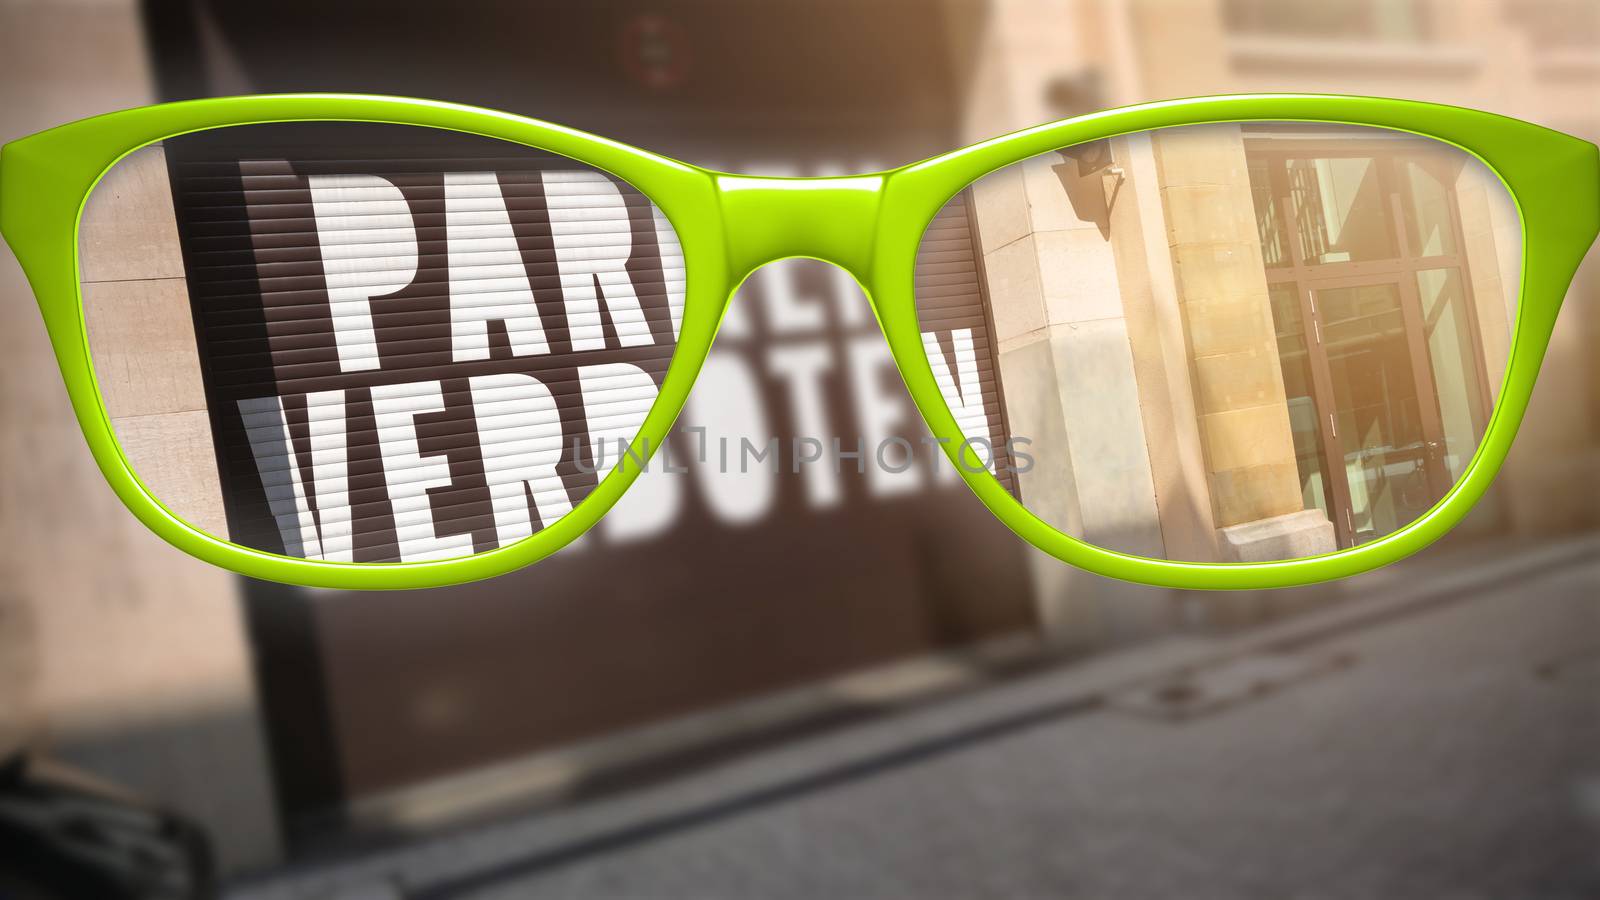 An image of green glasses and the text parking forbidden in german language on a garage door